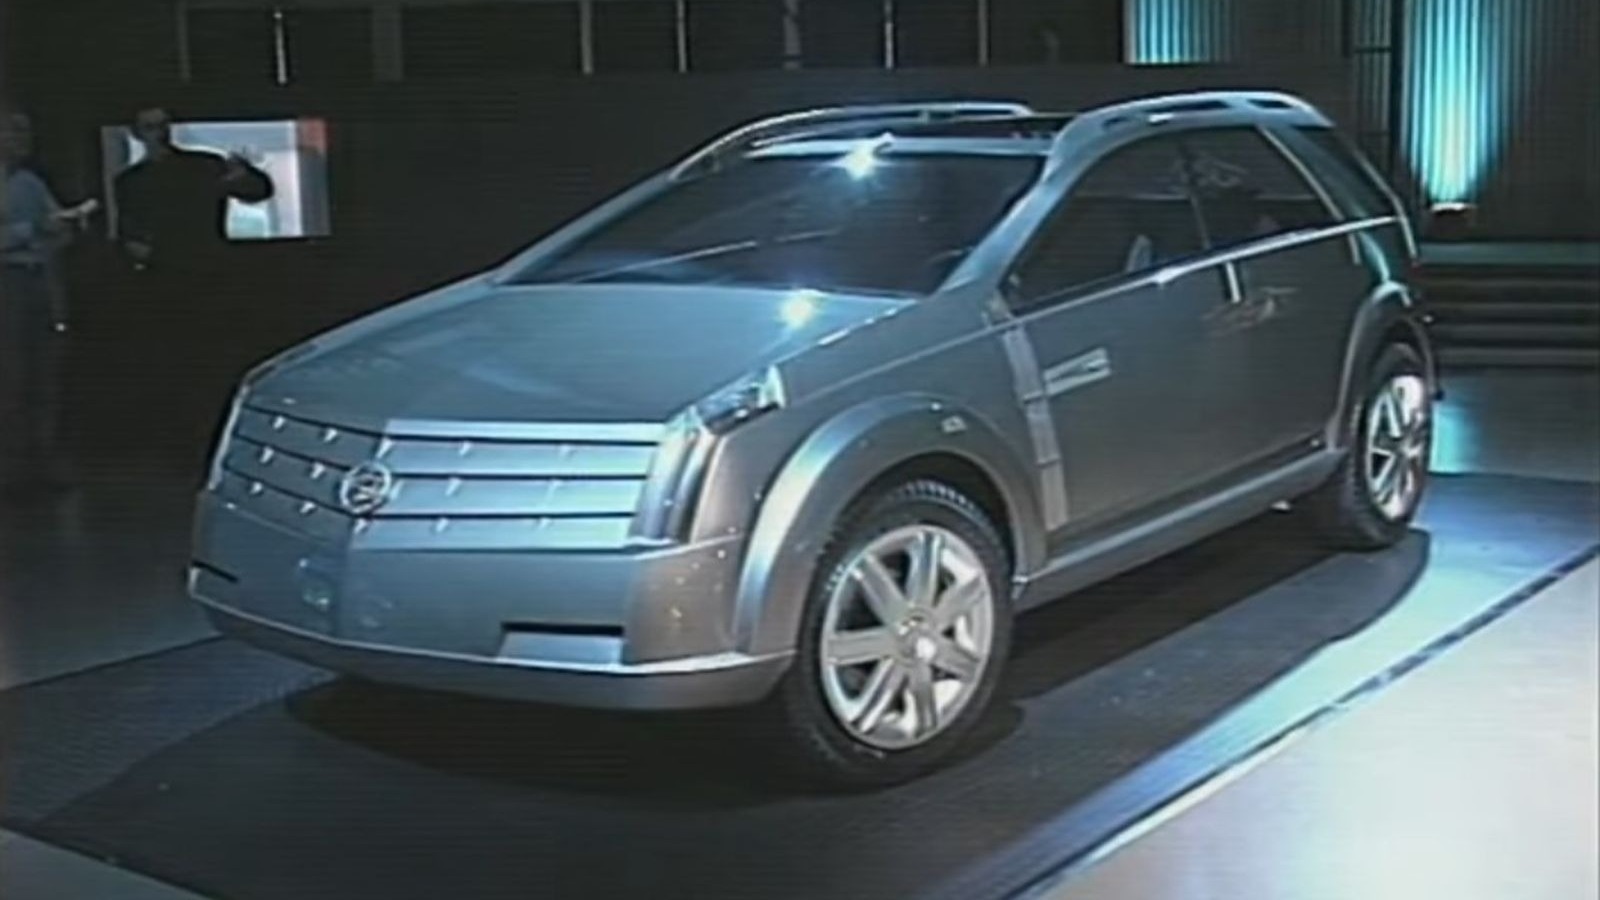 The Cadillac Vizion Concept Featured An Extremely Cool Rear Cargo Area